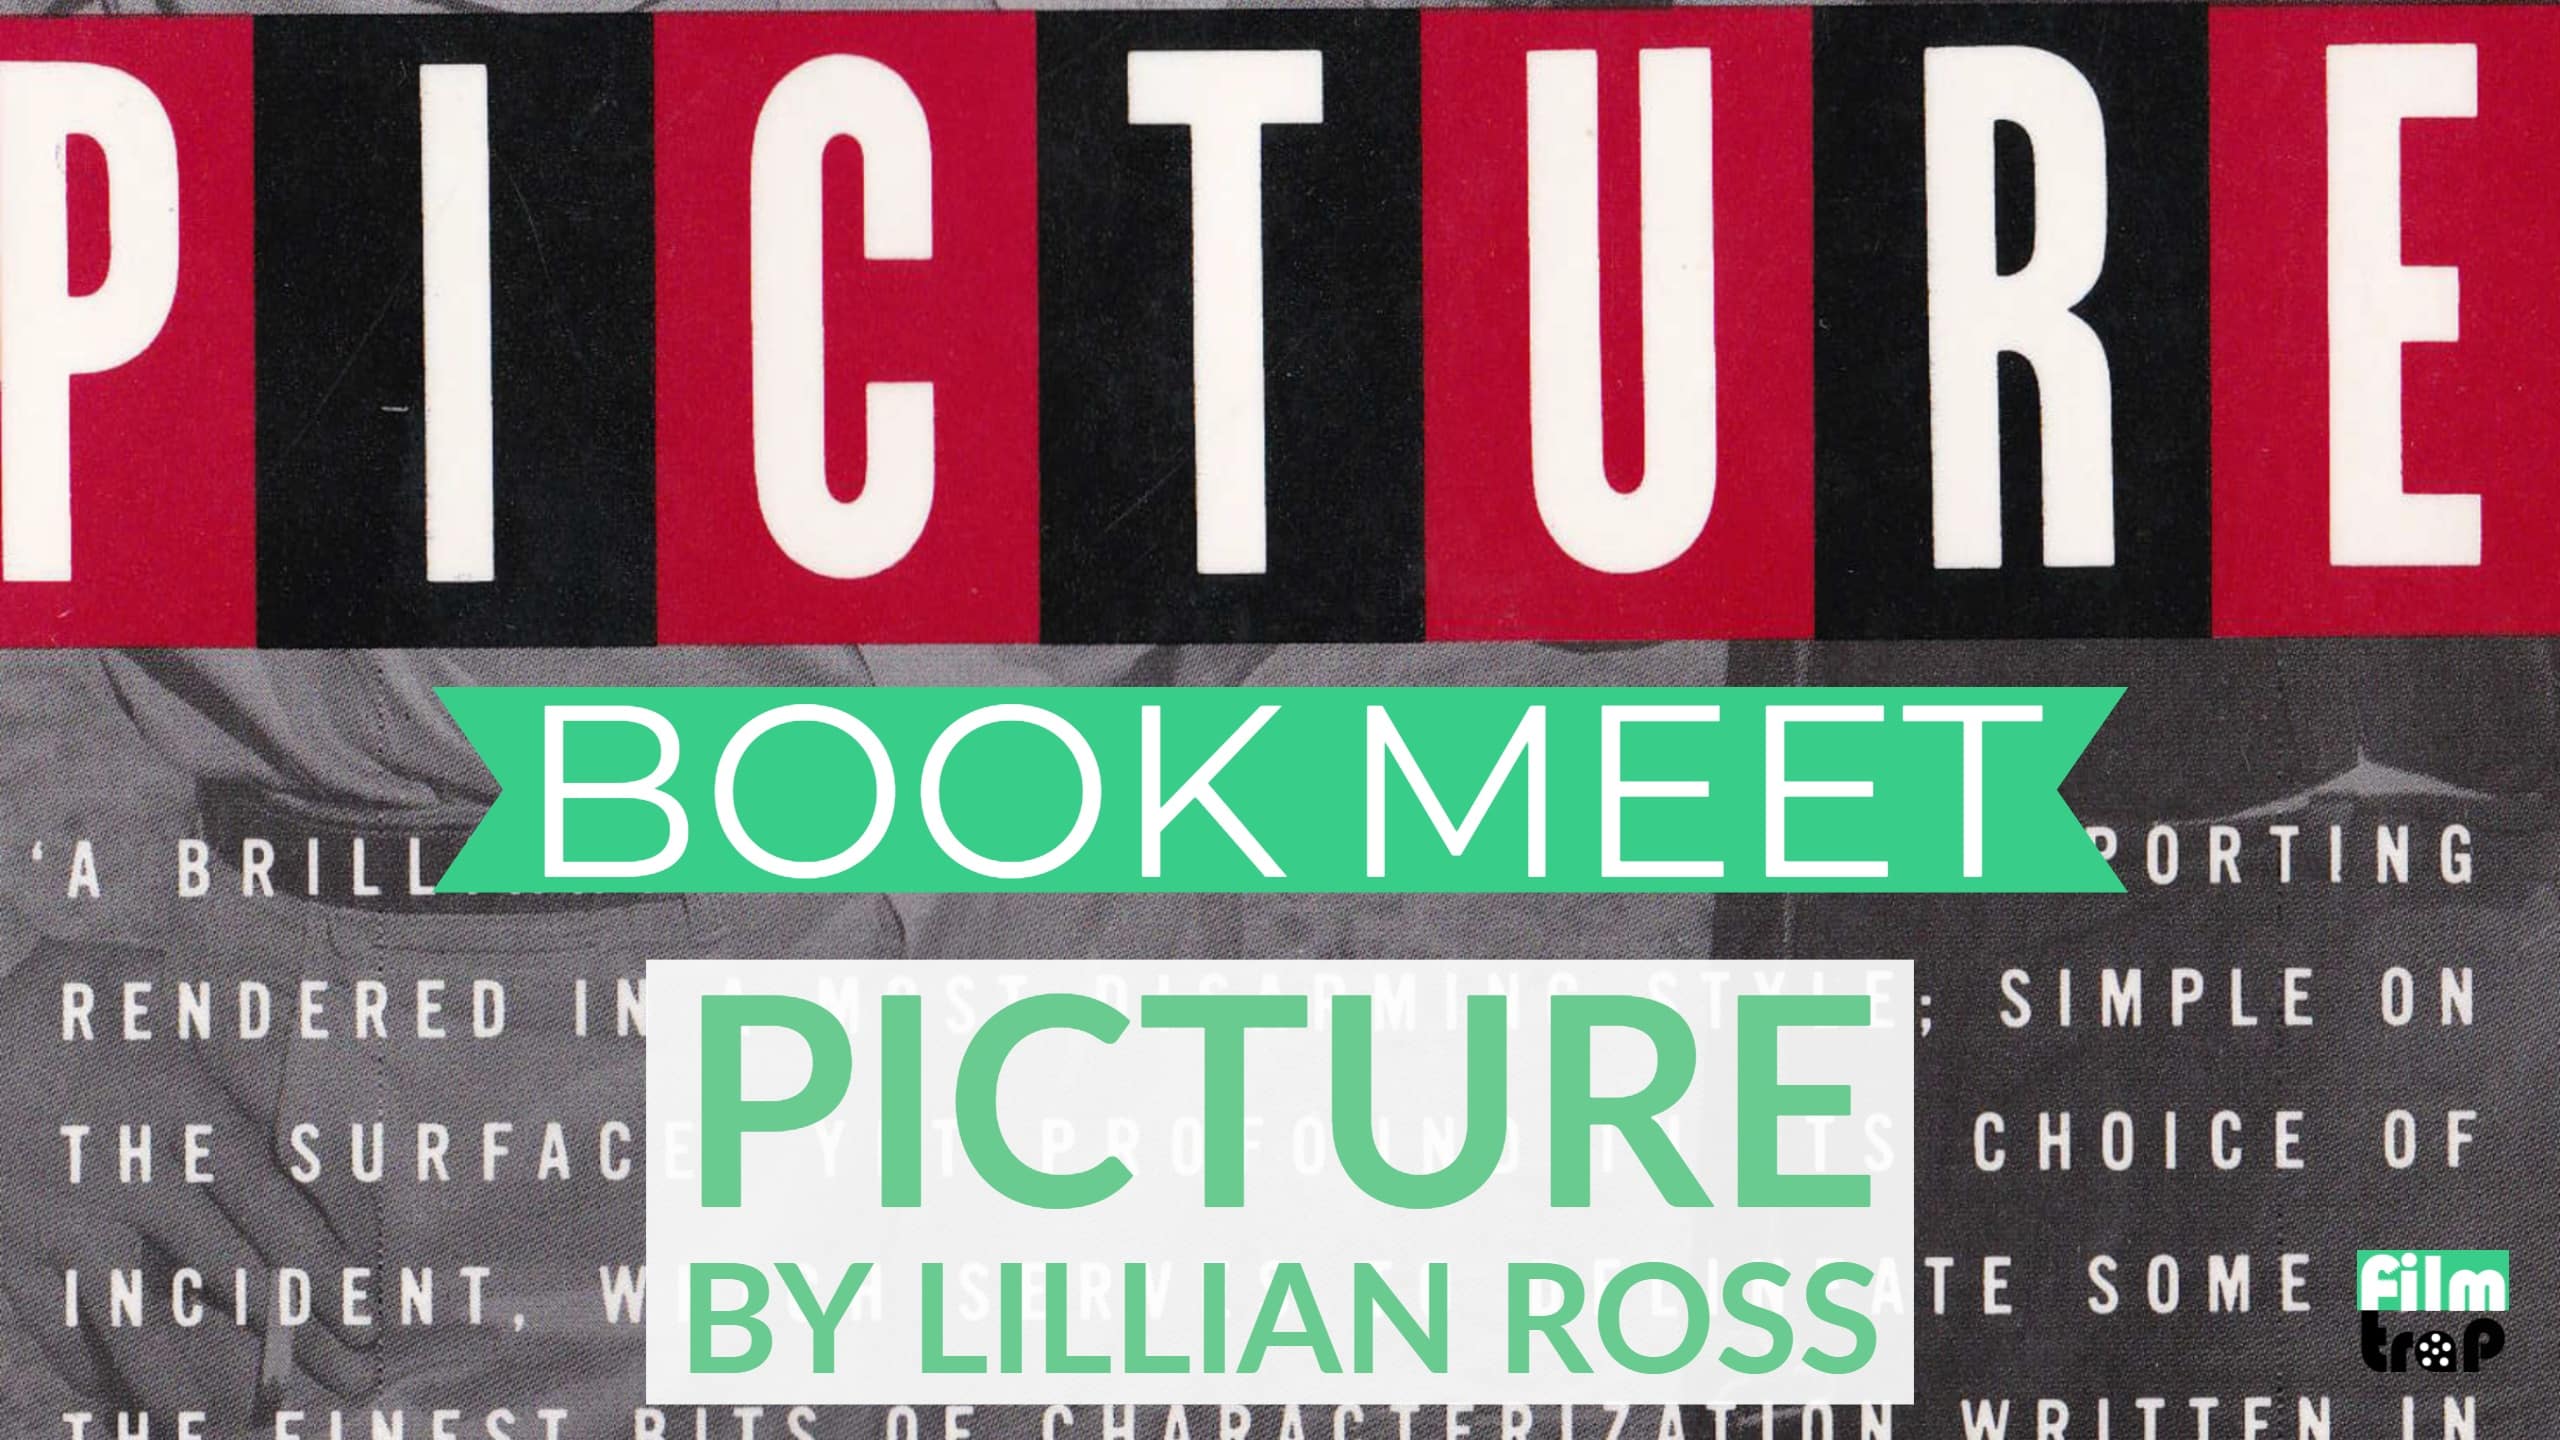 Book Meet: Picture by Lillian Ross